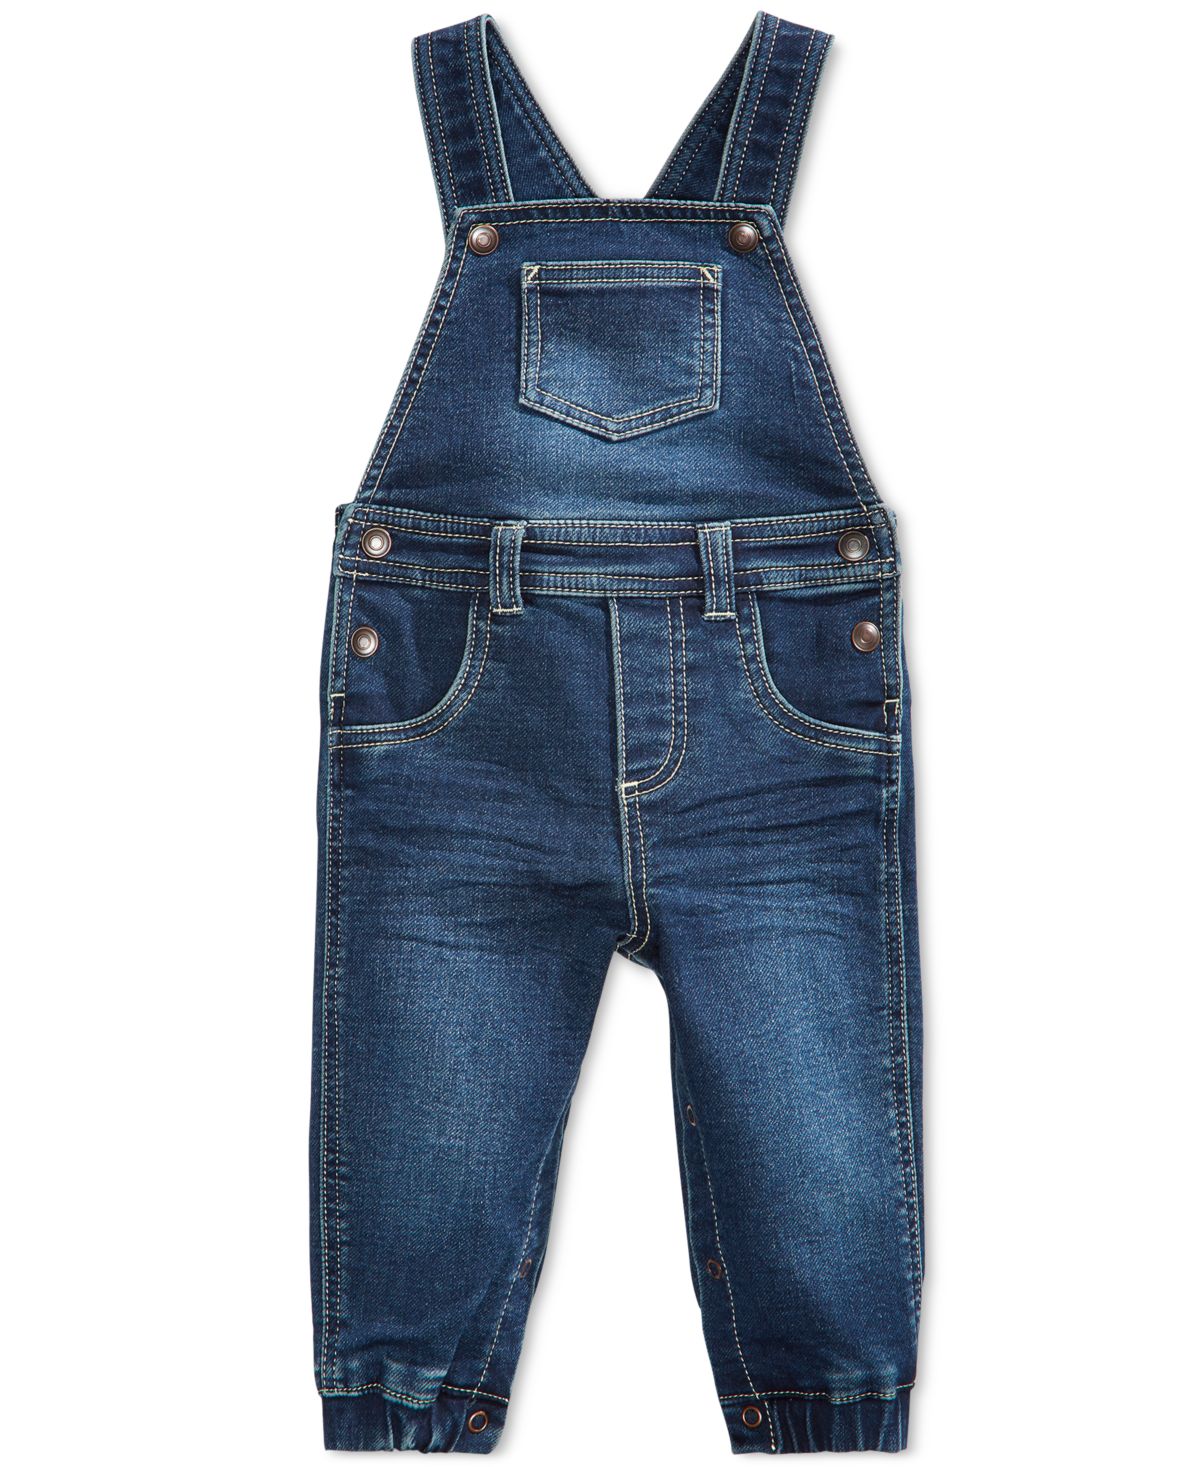 My Guide to Overalls | The Merchant Girl